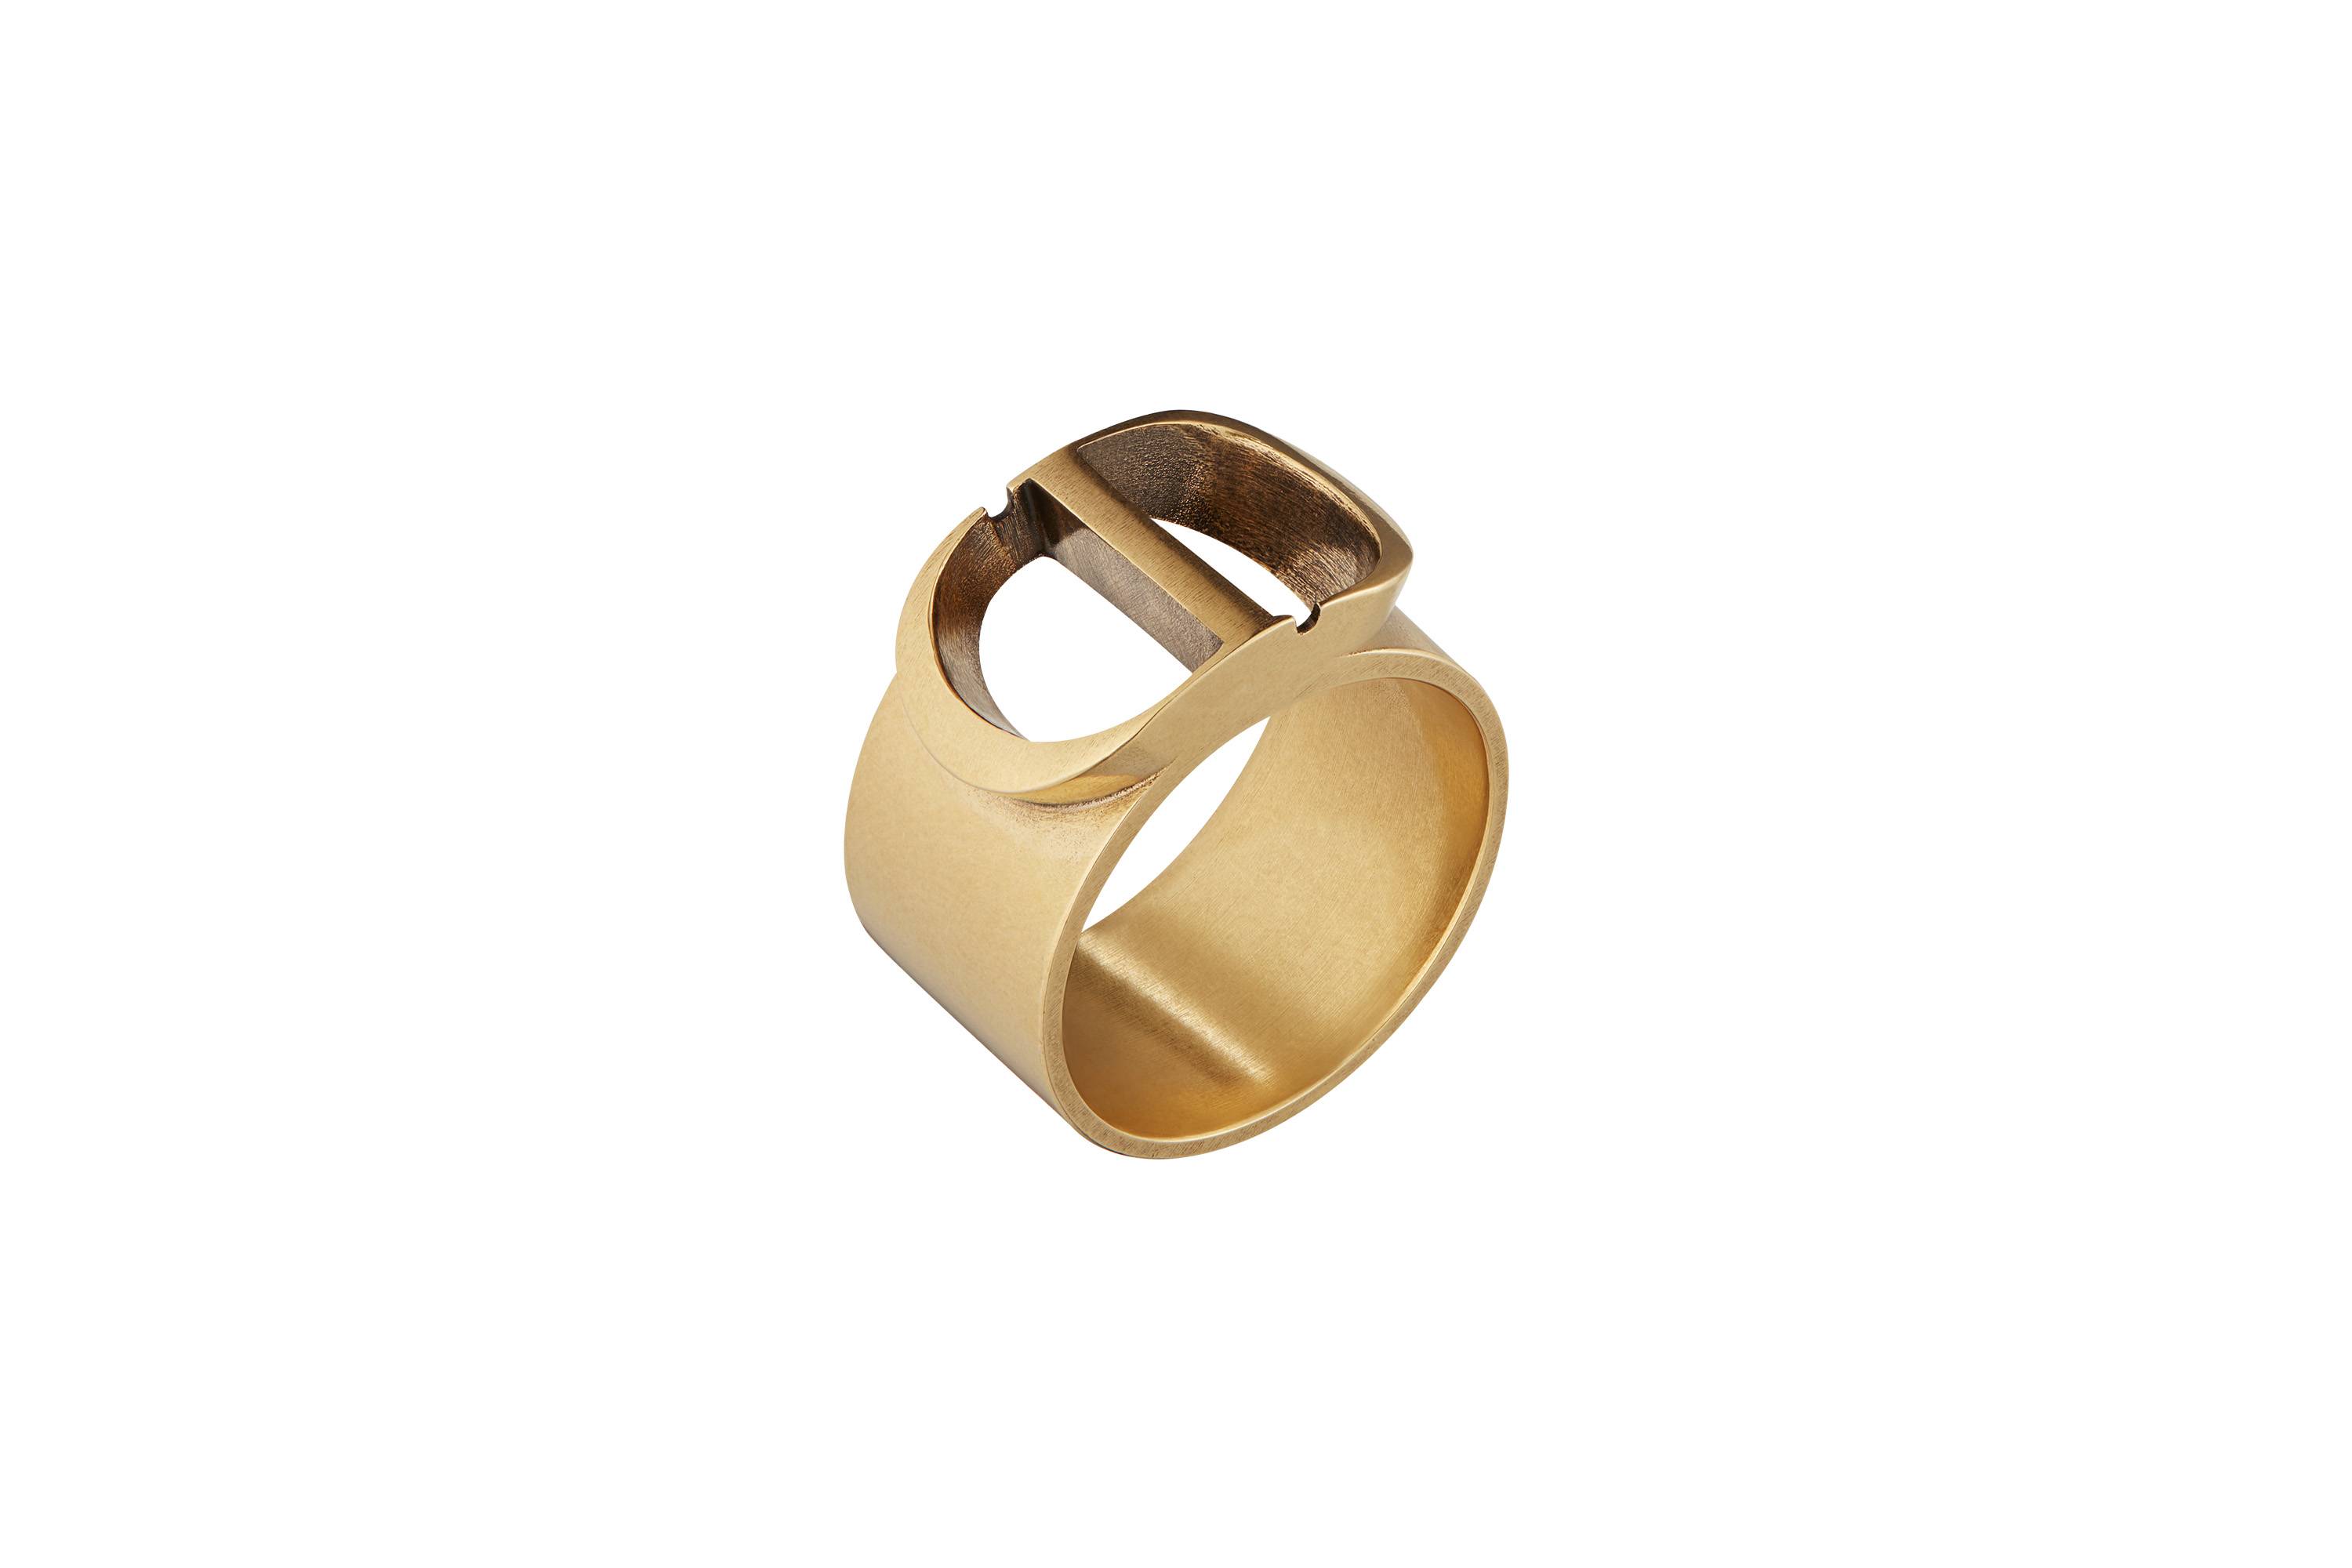 “30 Montaigne” ring in metal with antique gold finish. -HK$2450